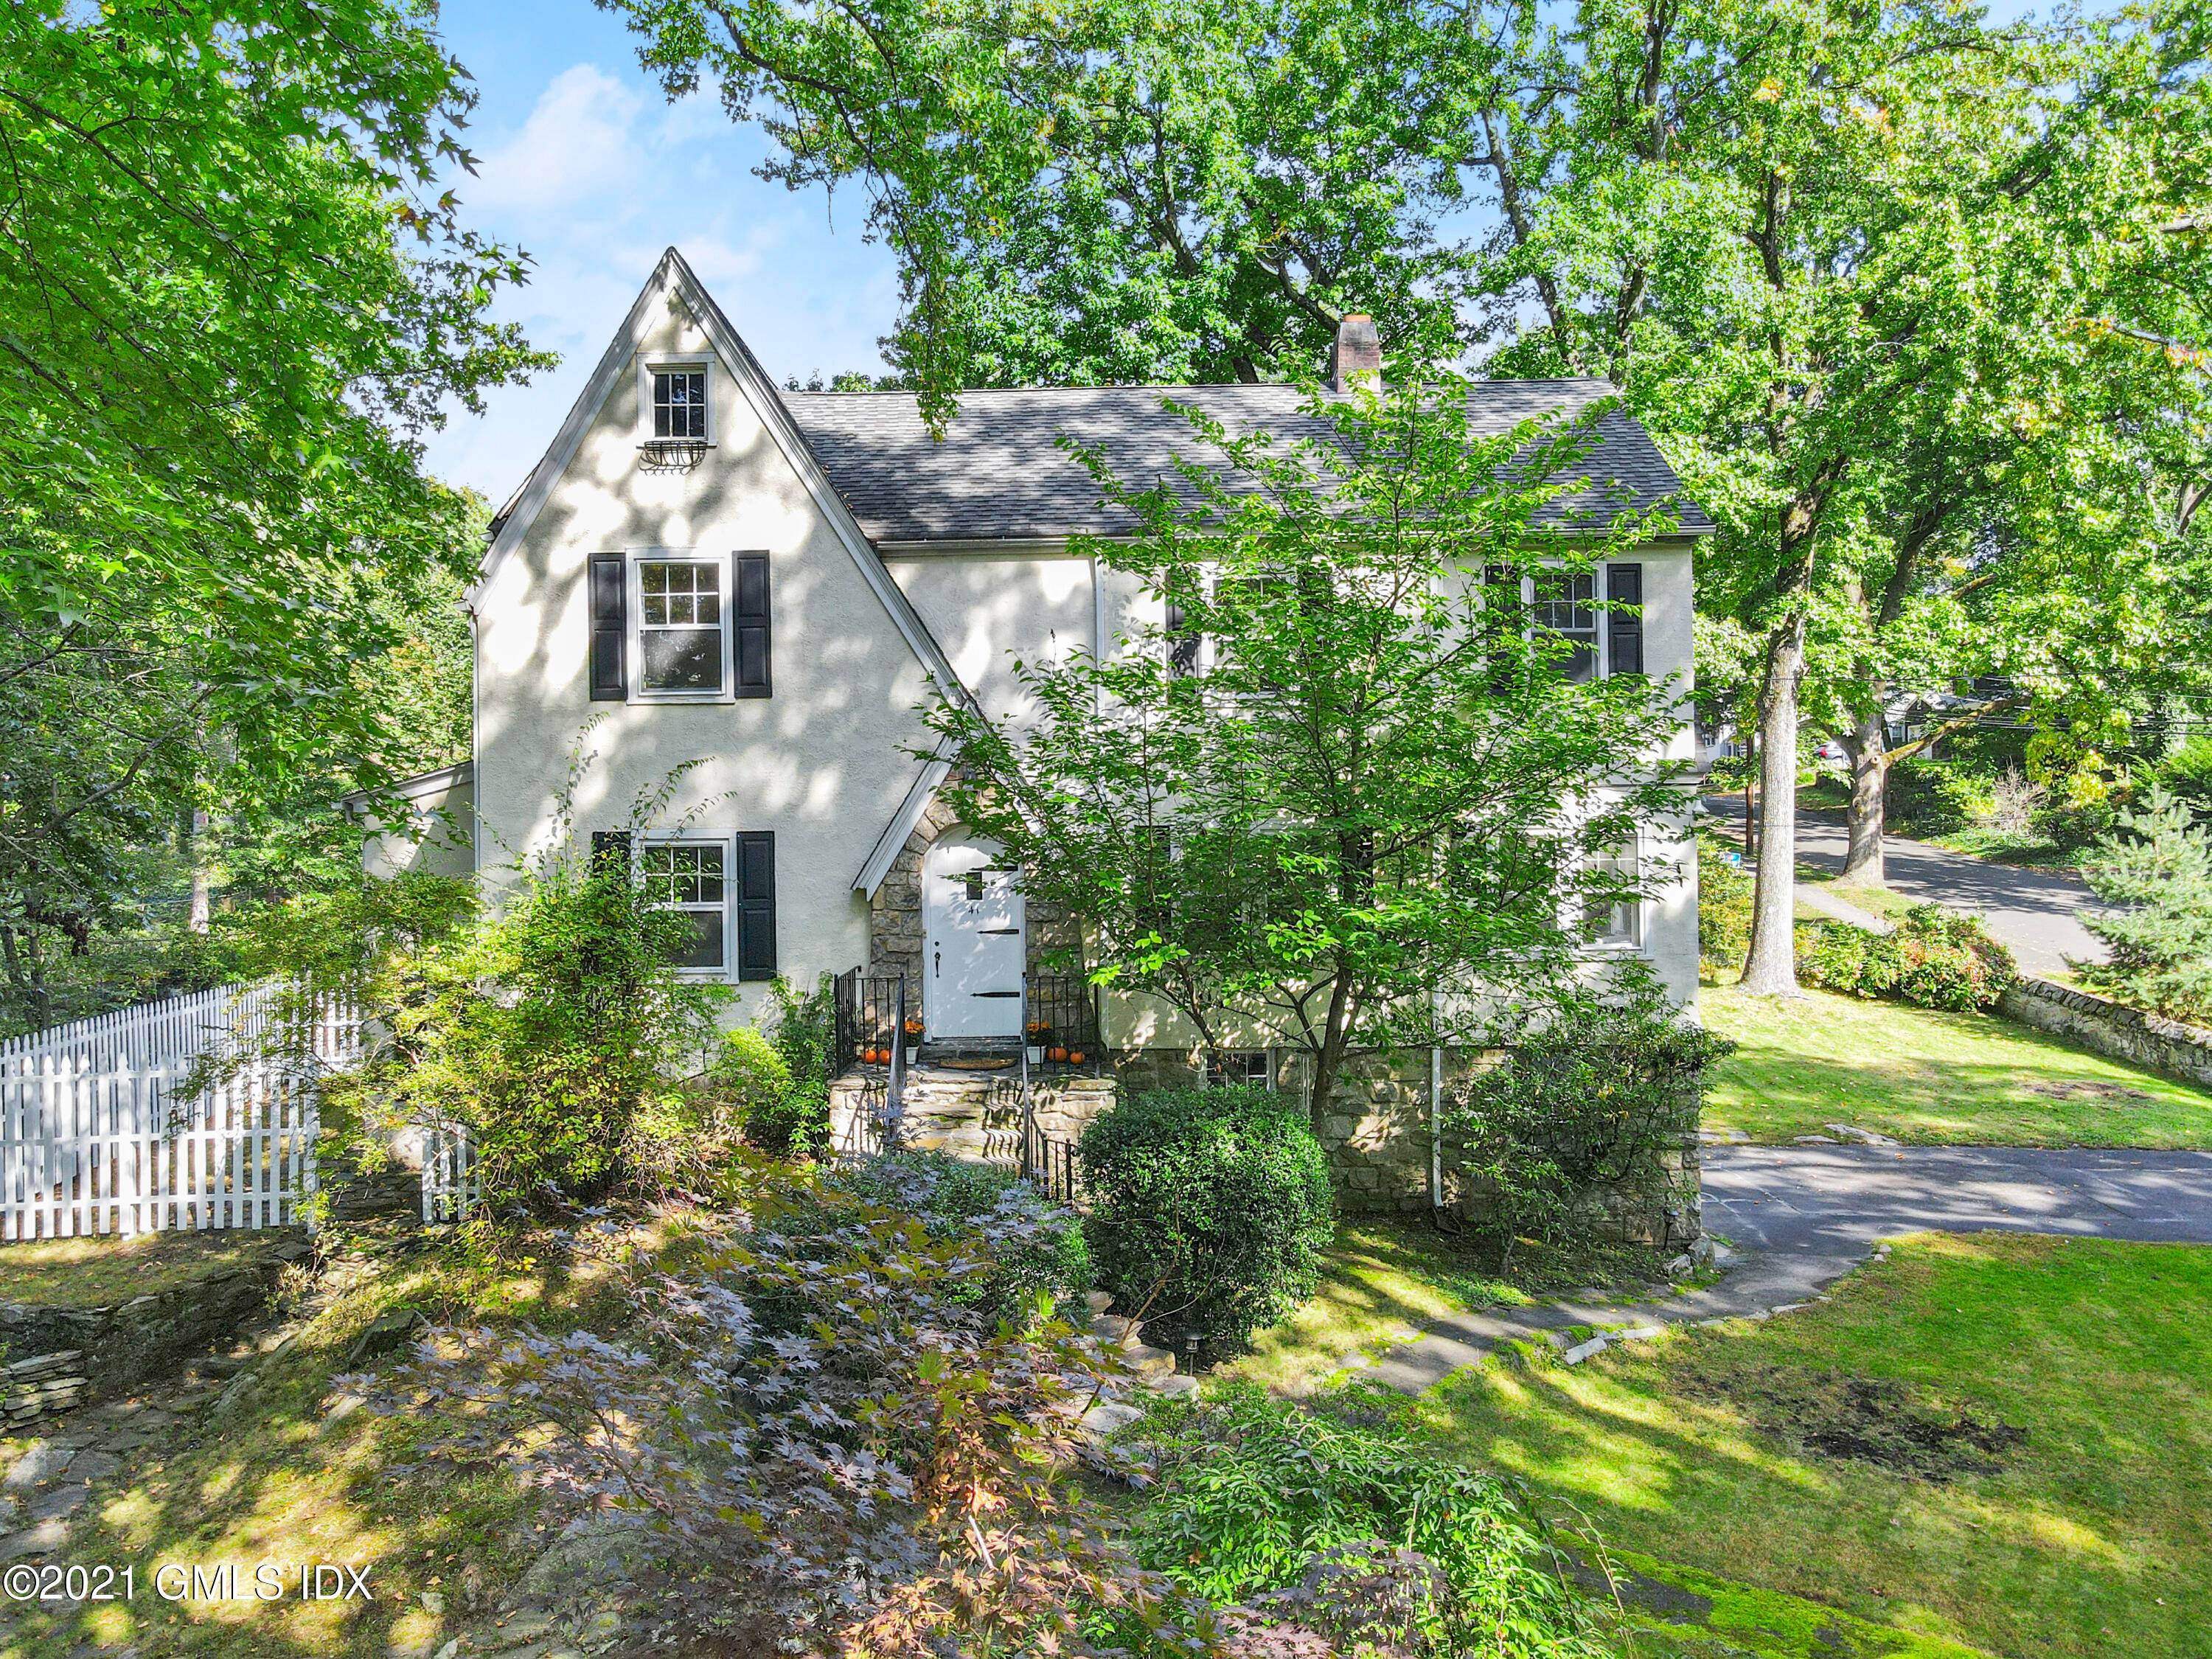 Enjoy living in a stately tudor style home which has been beautifully updated, while having the ease of everything close by train station, Cos Cob Park, Loughlin Park, and the ...